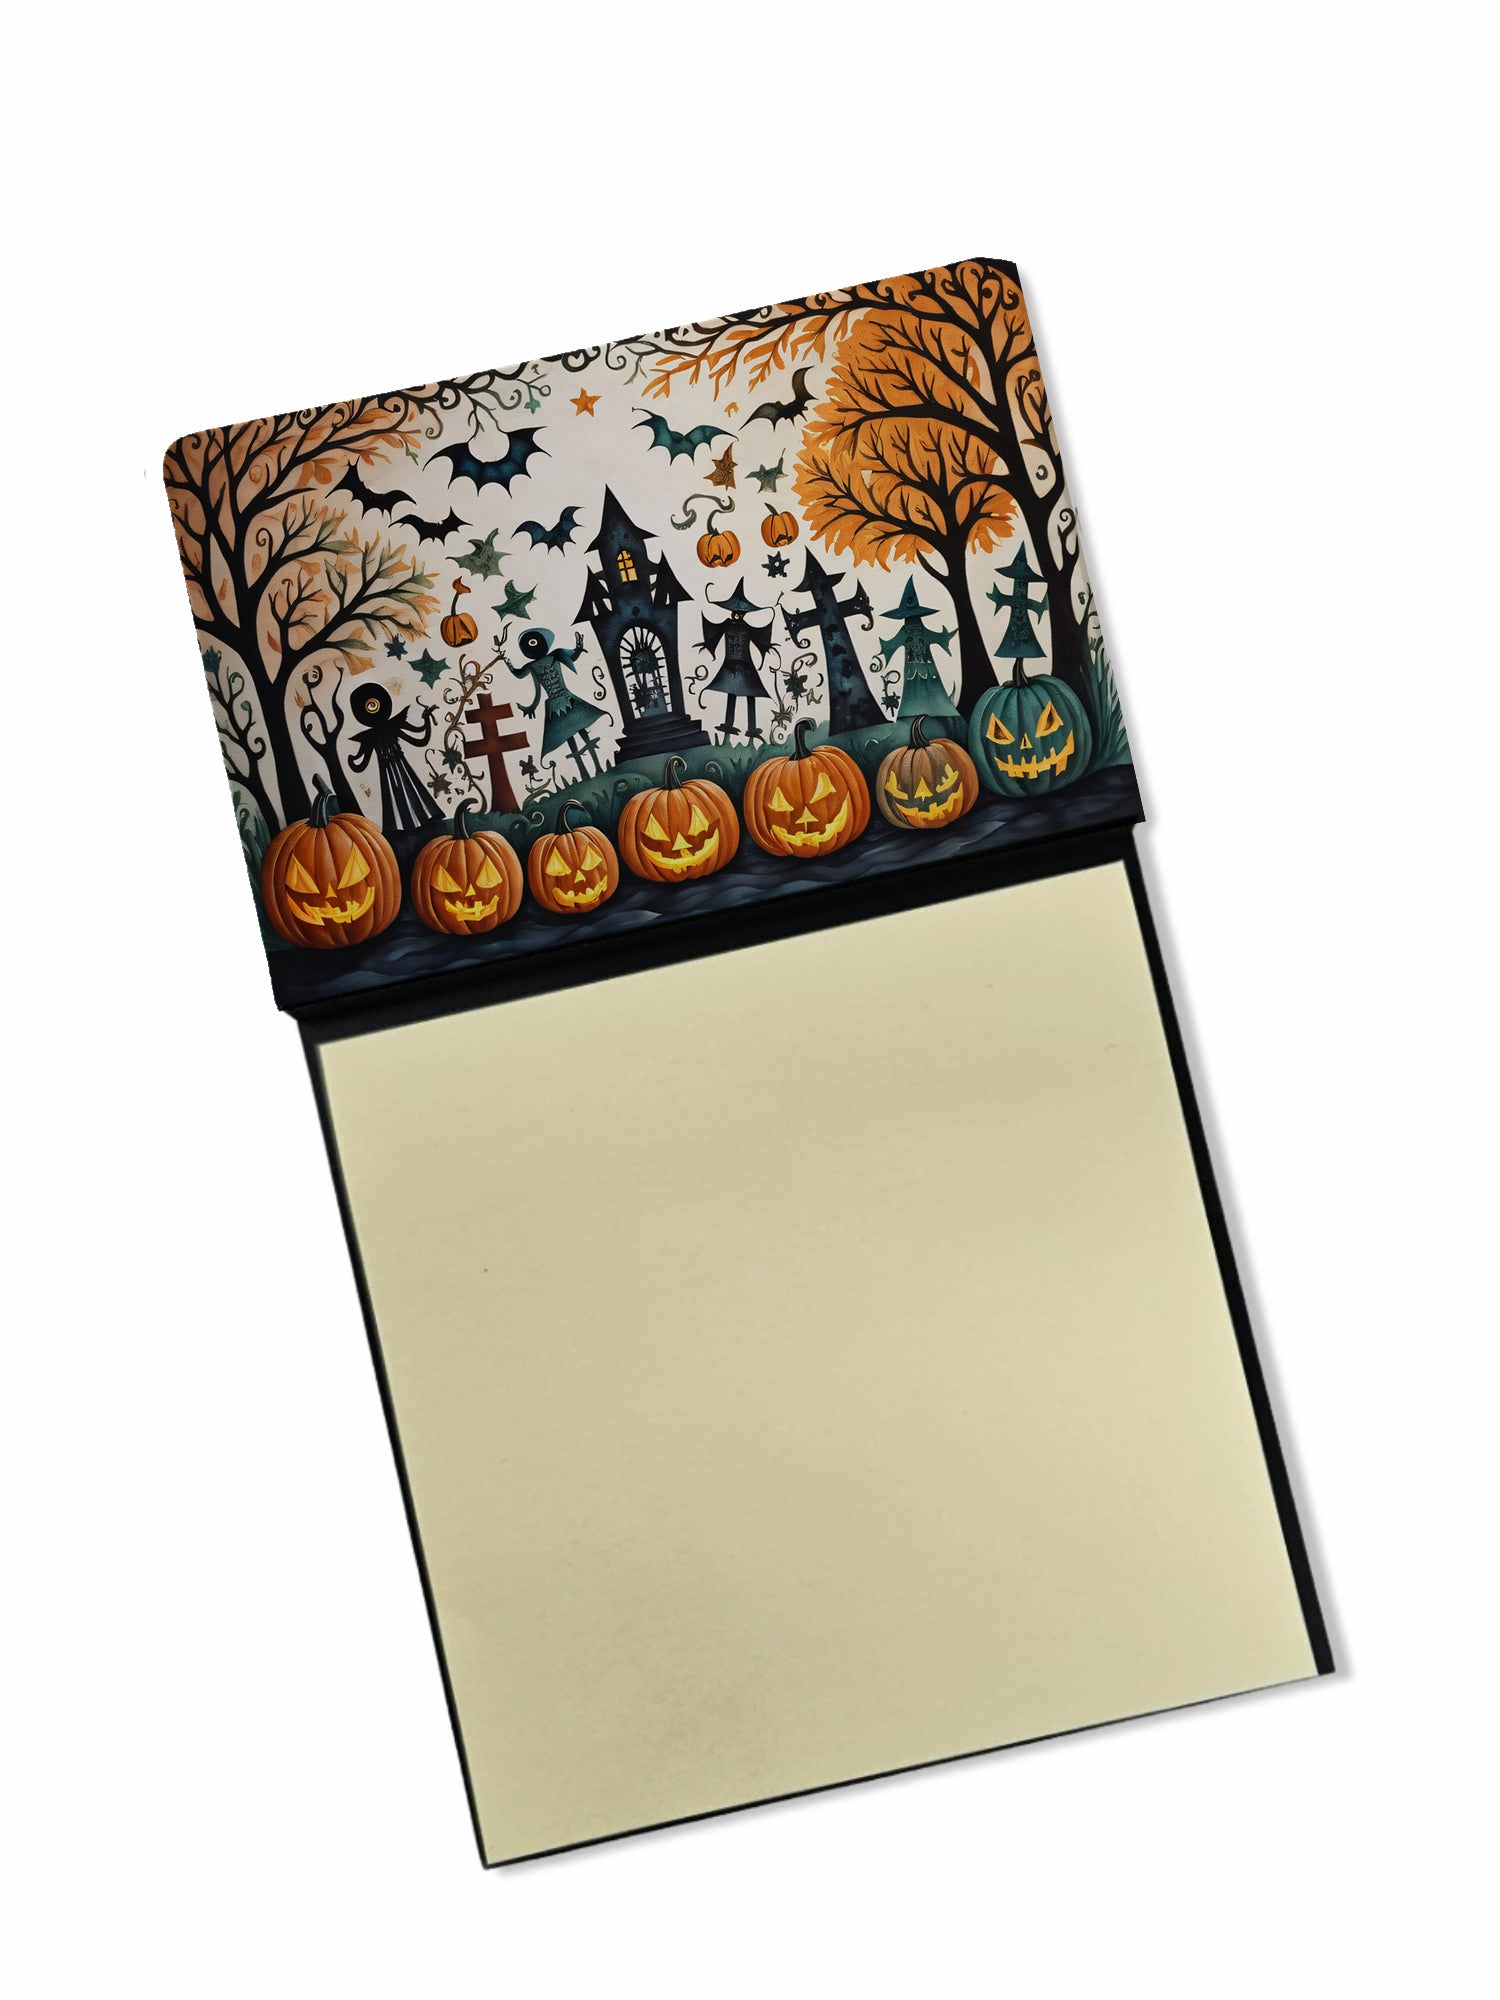 Buy this Papel Picado Skeletons Spooky Halloween Sticky Note Holder